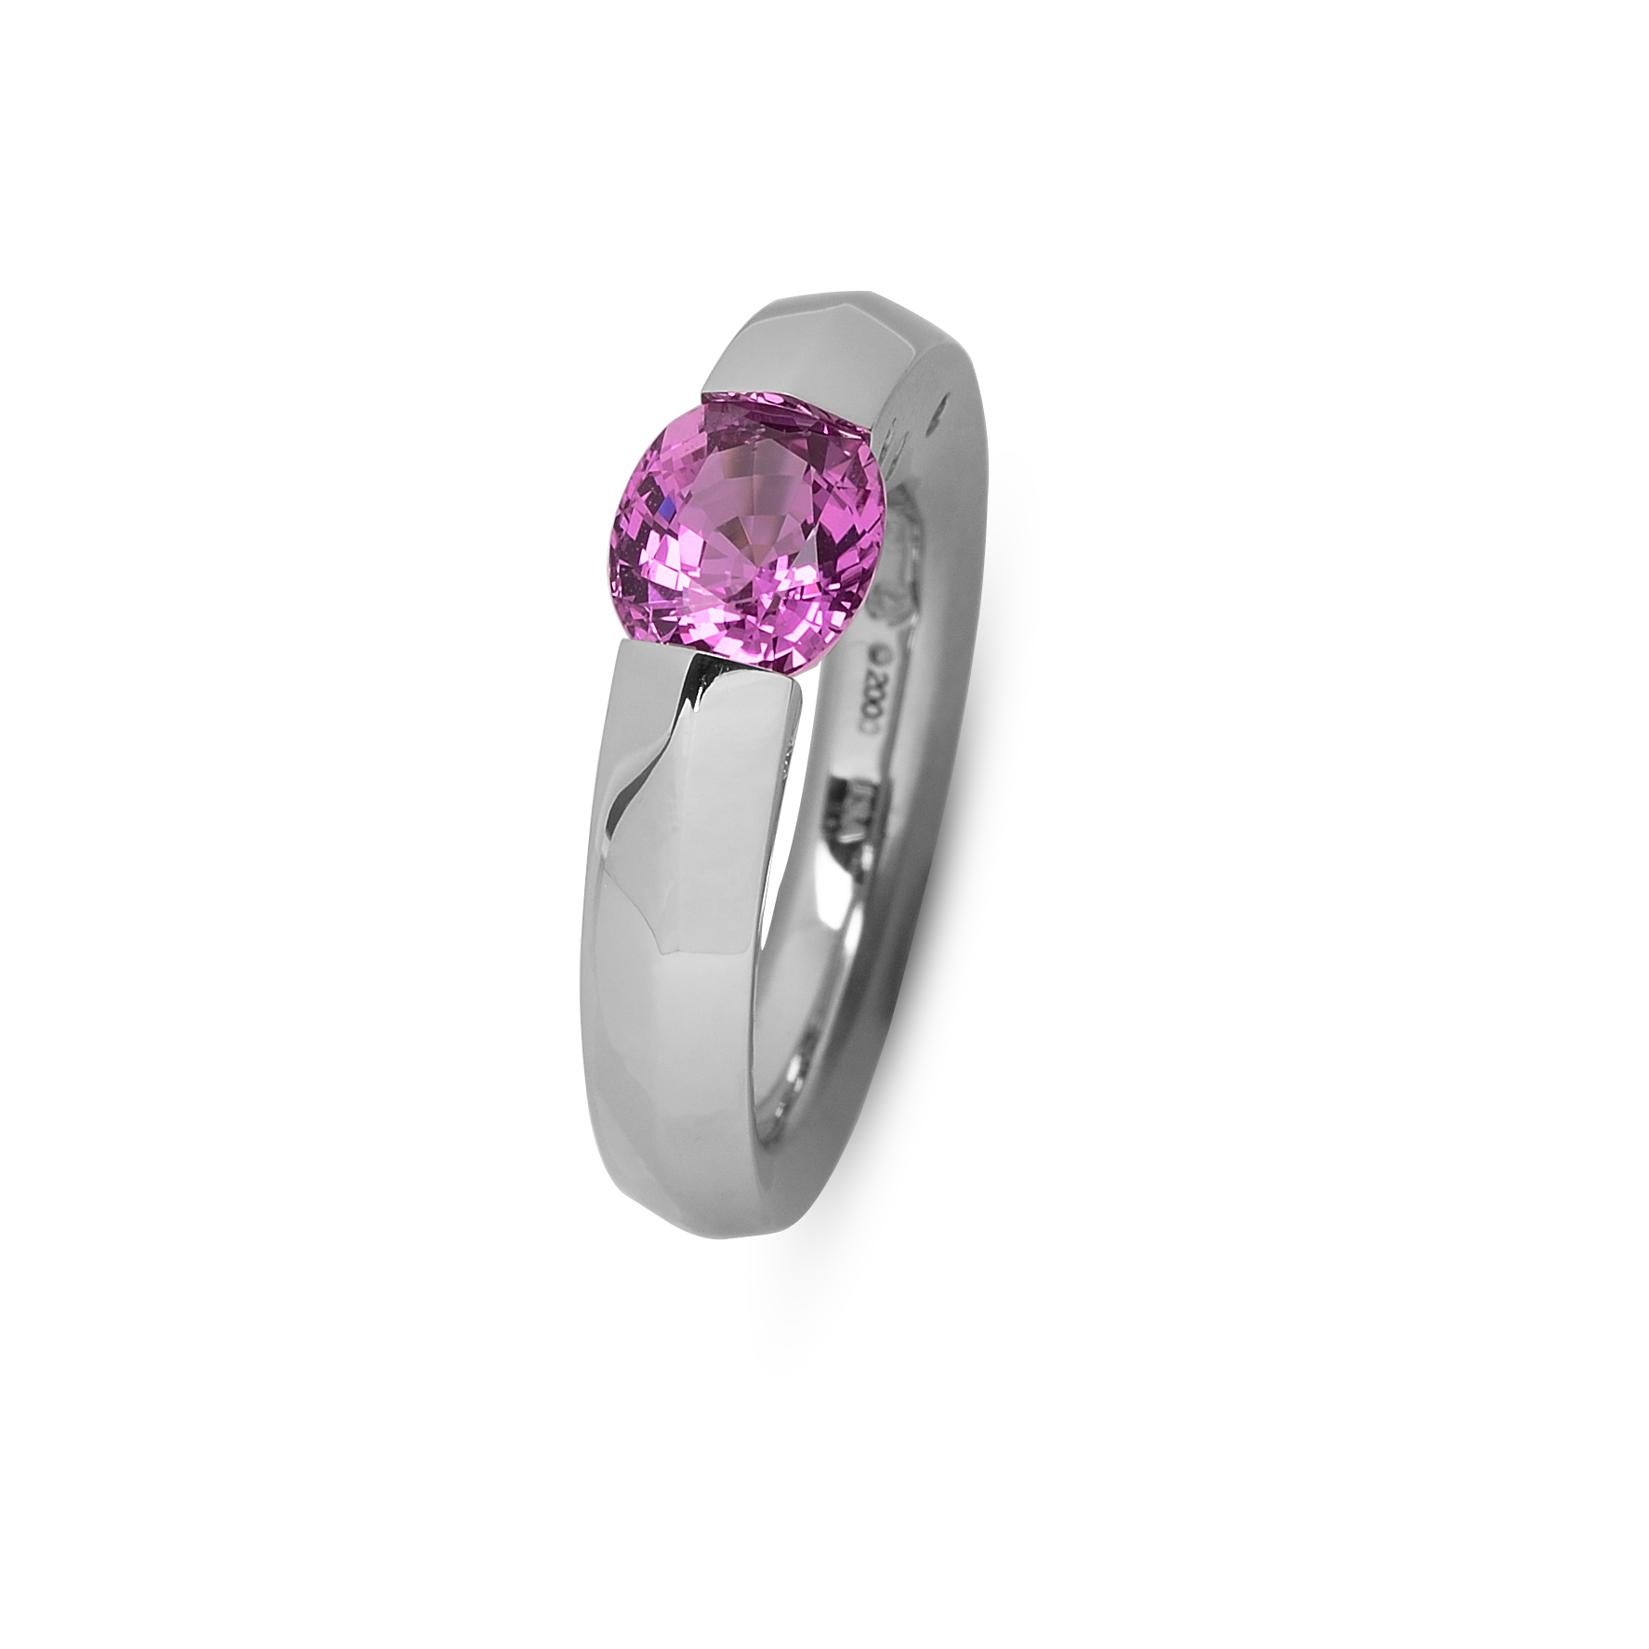 The Steven Kretchmer Blade ring with a tension-set pink sapphire is handcrafted in platinum with a shiny top finish and matte undercut. The 2.15 ct. oval cut sapphire is a saturated bubblegum pink which in different lighting  can have an almost